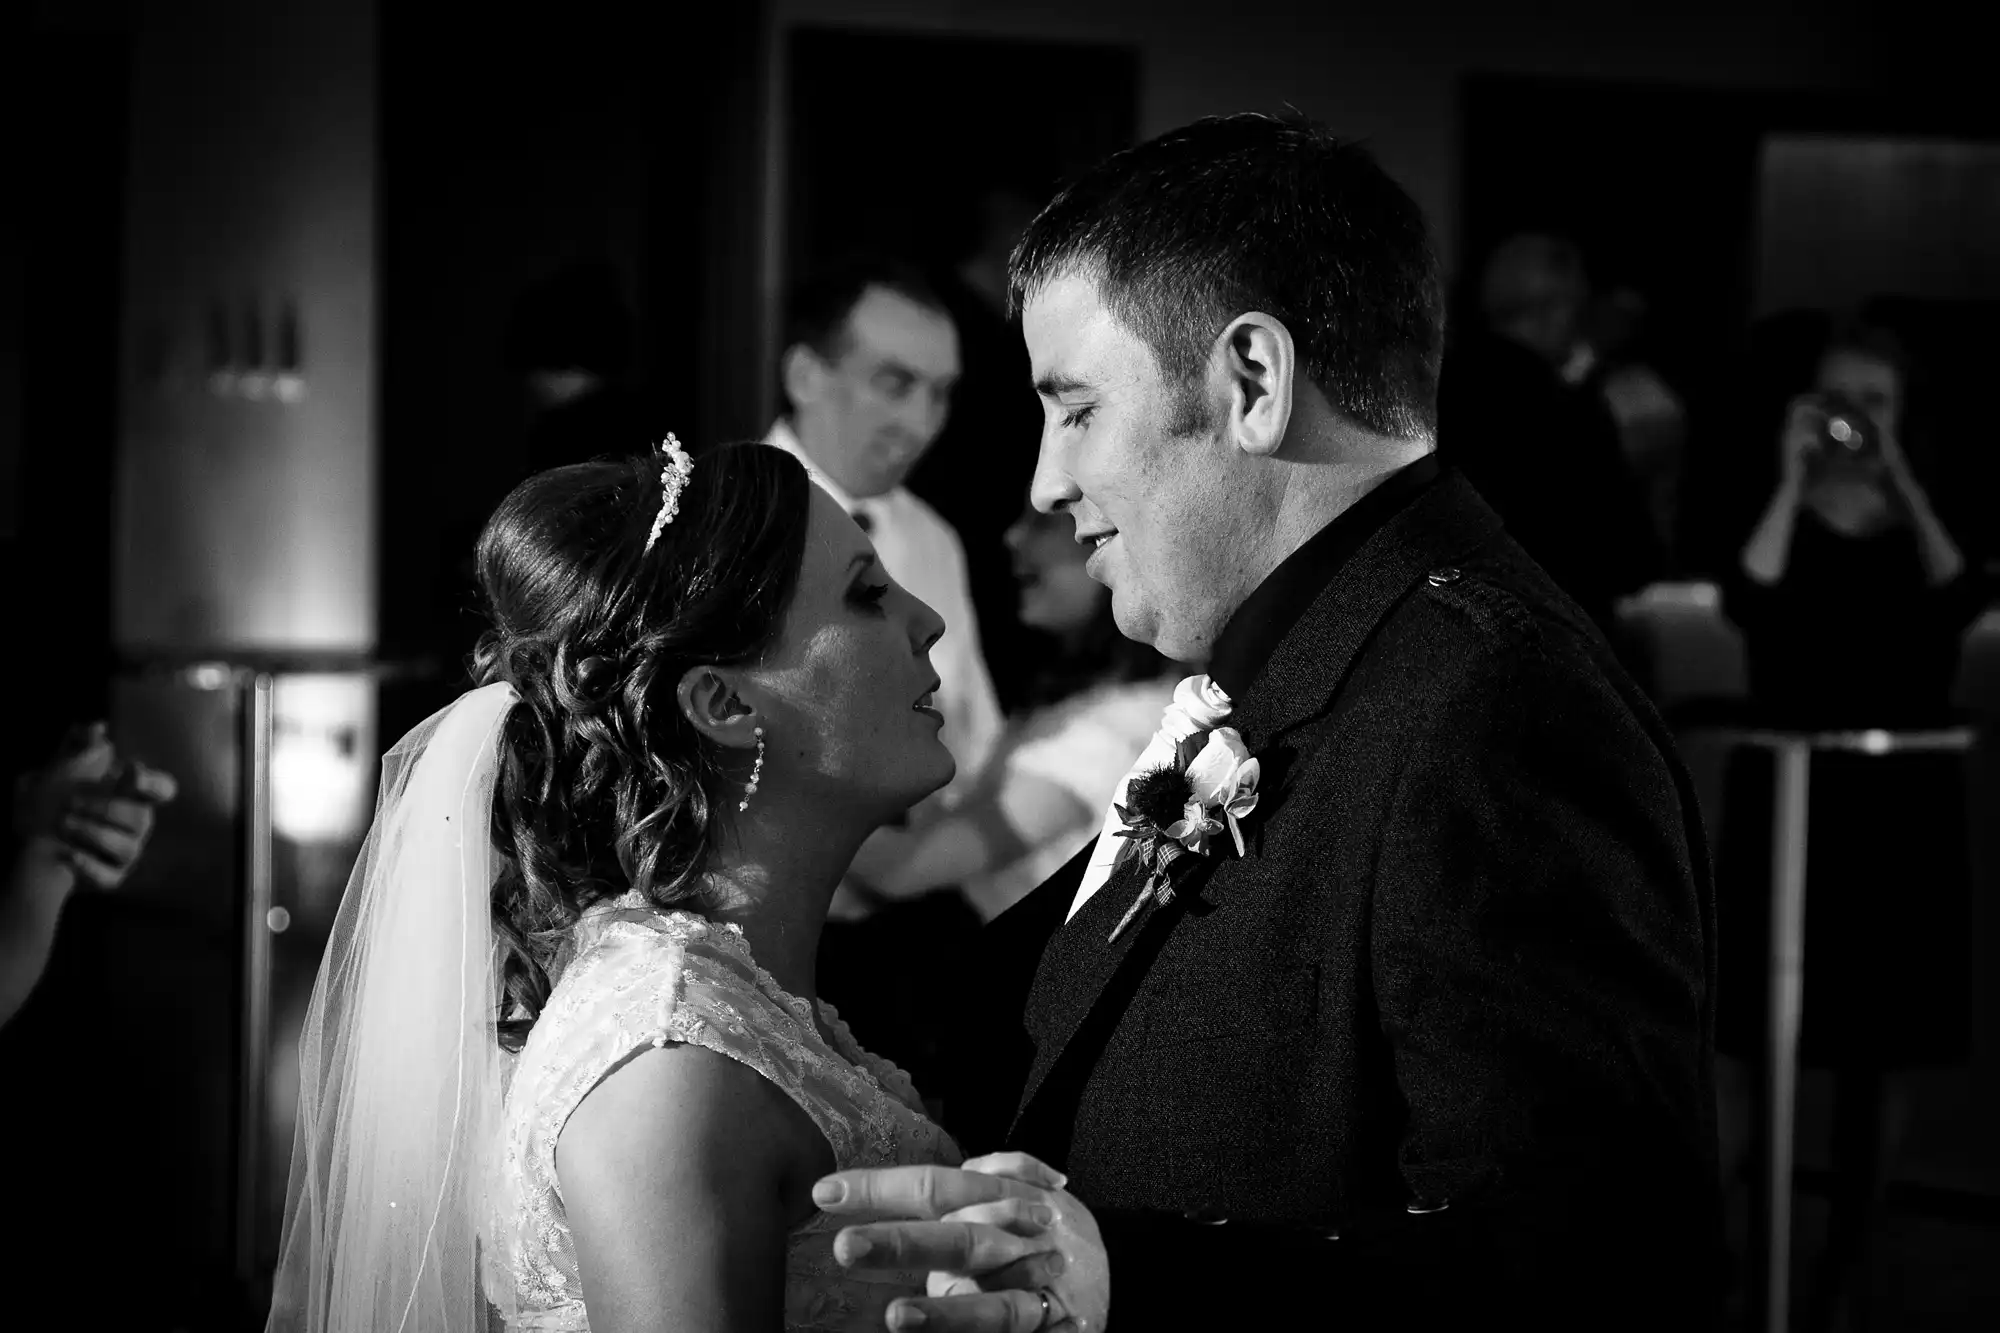 Bride and groom sharing an intimate moment during their wedding dance, captured in black and white.